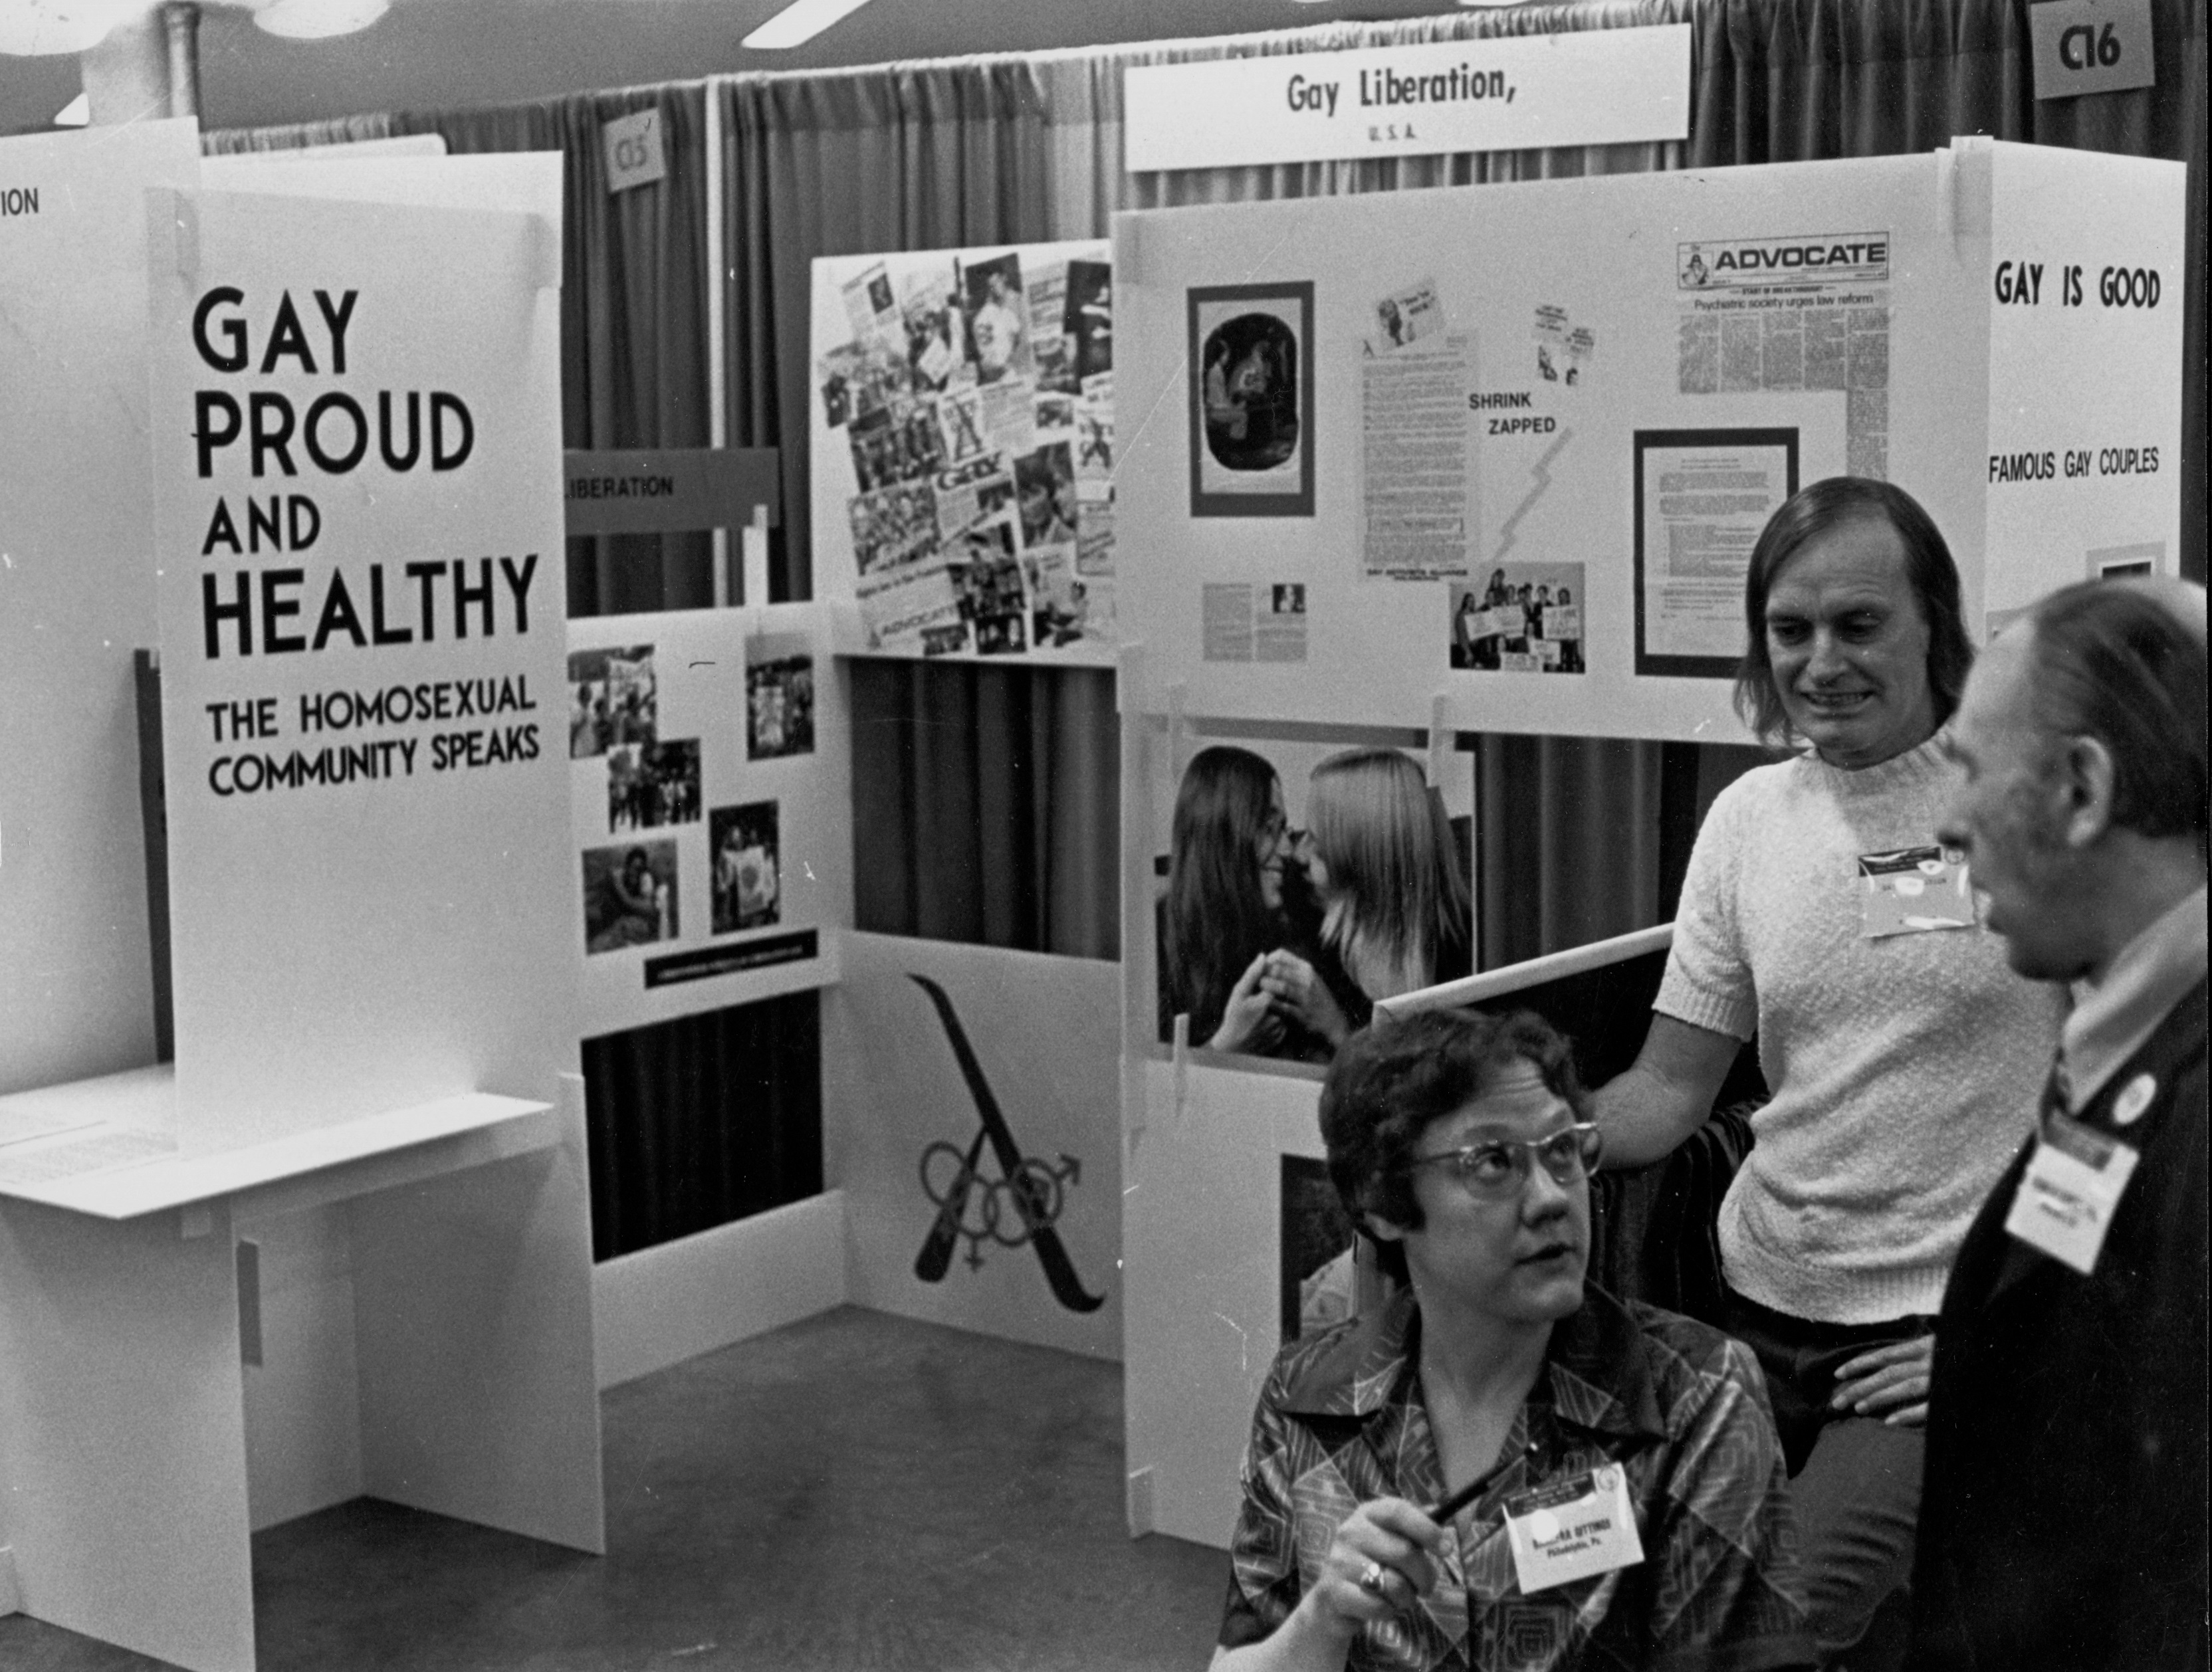 Archival 1970s photograph of Barbara Gittings and others with conference displays